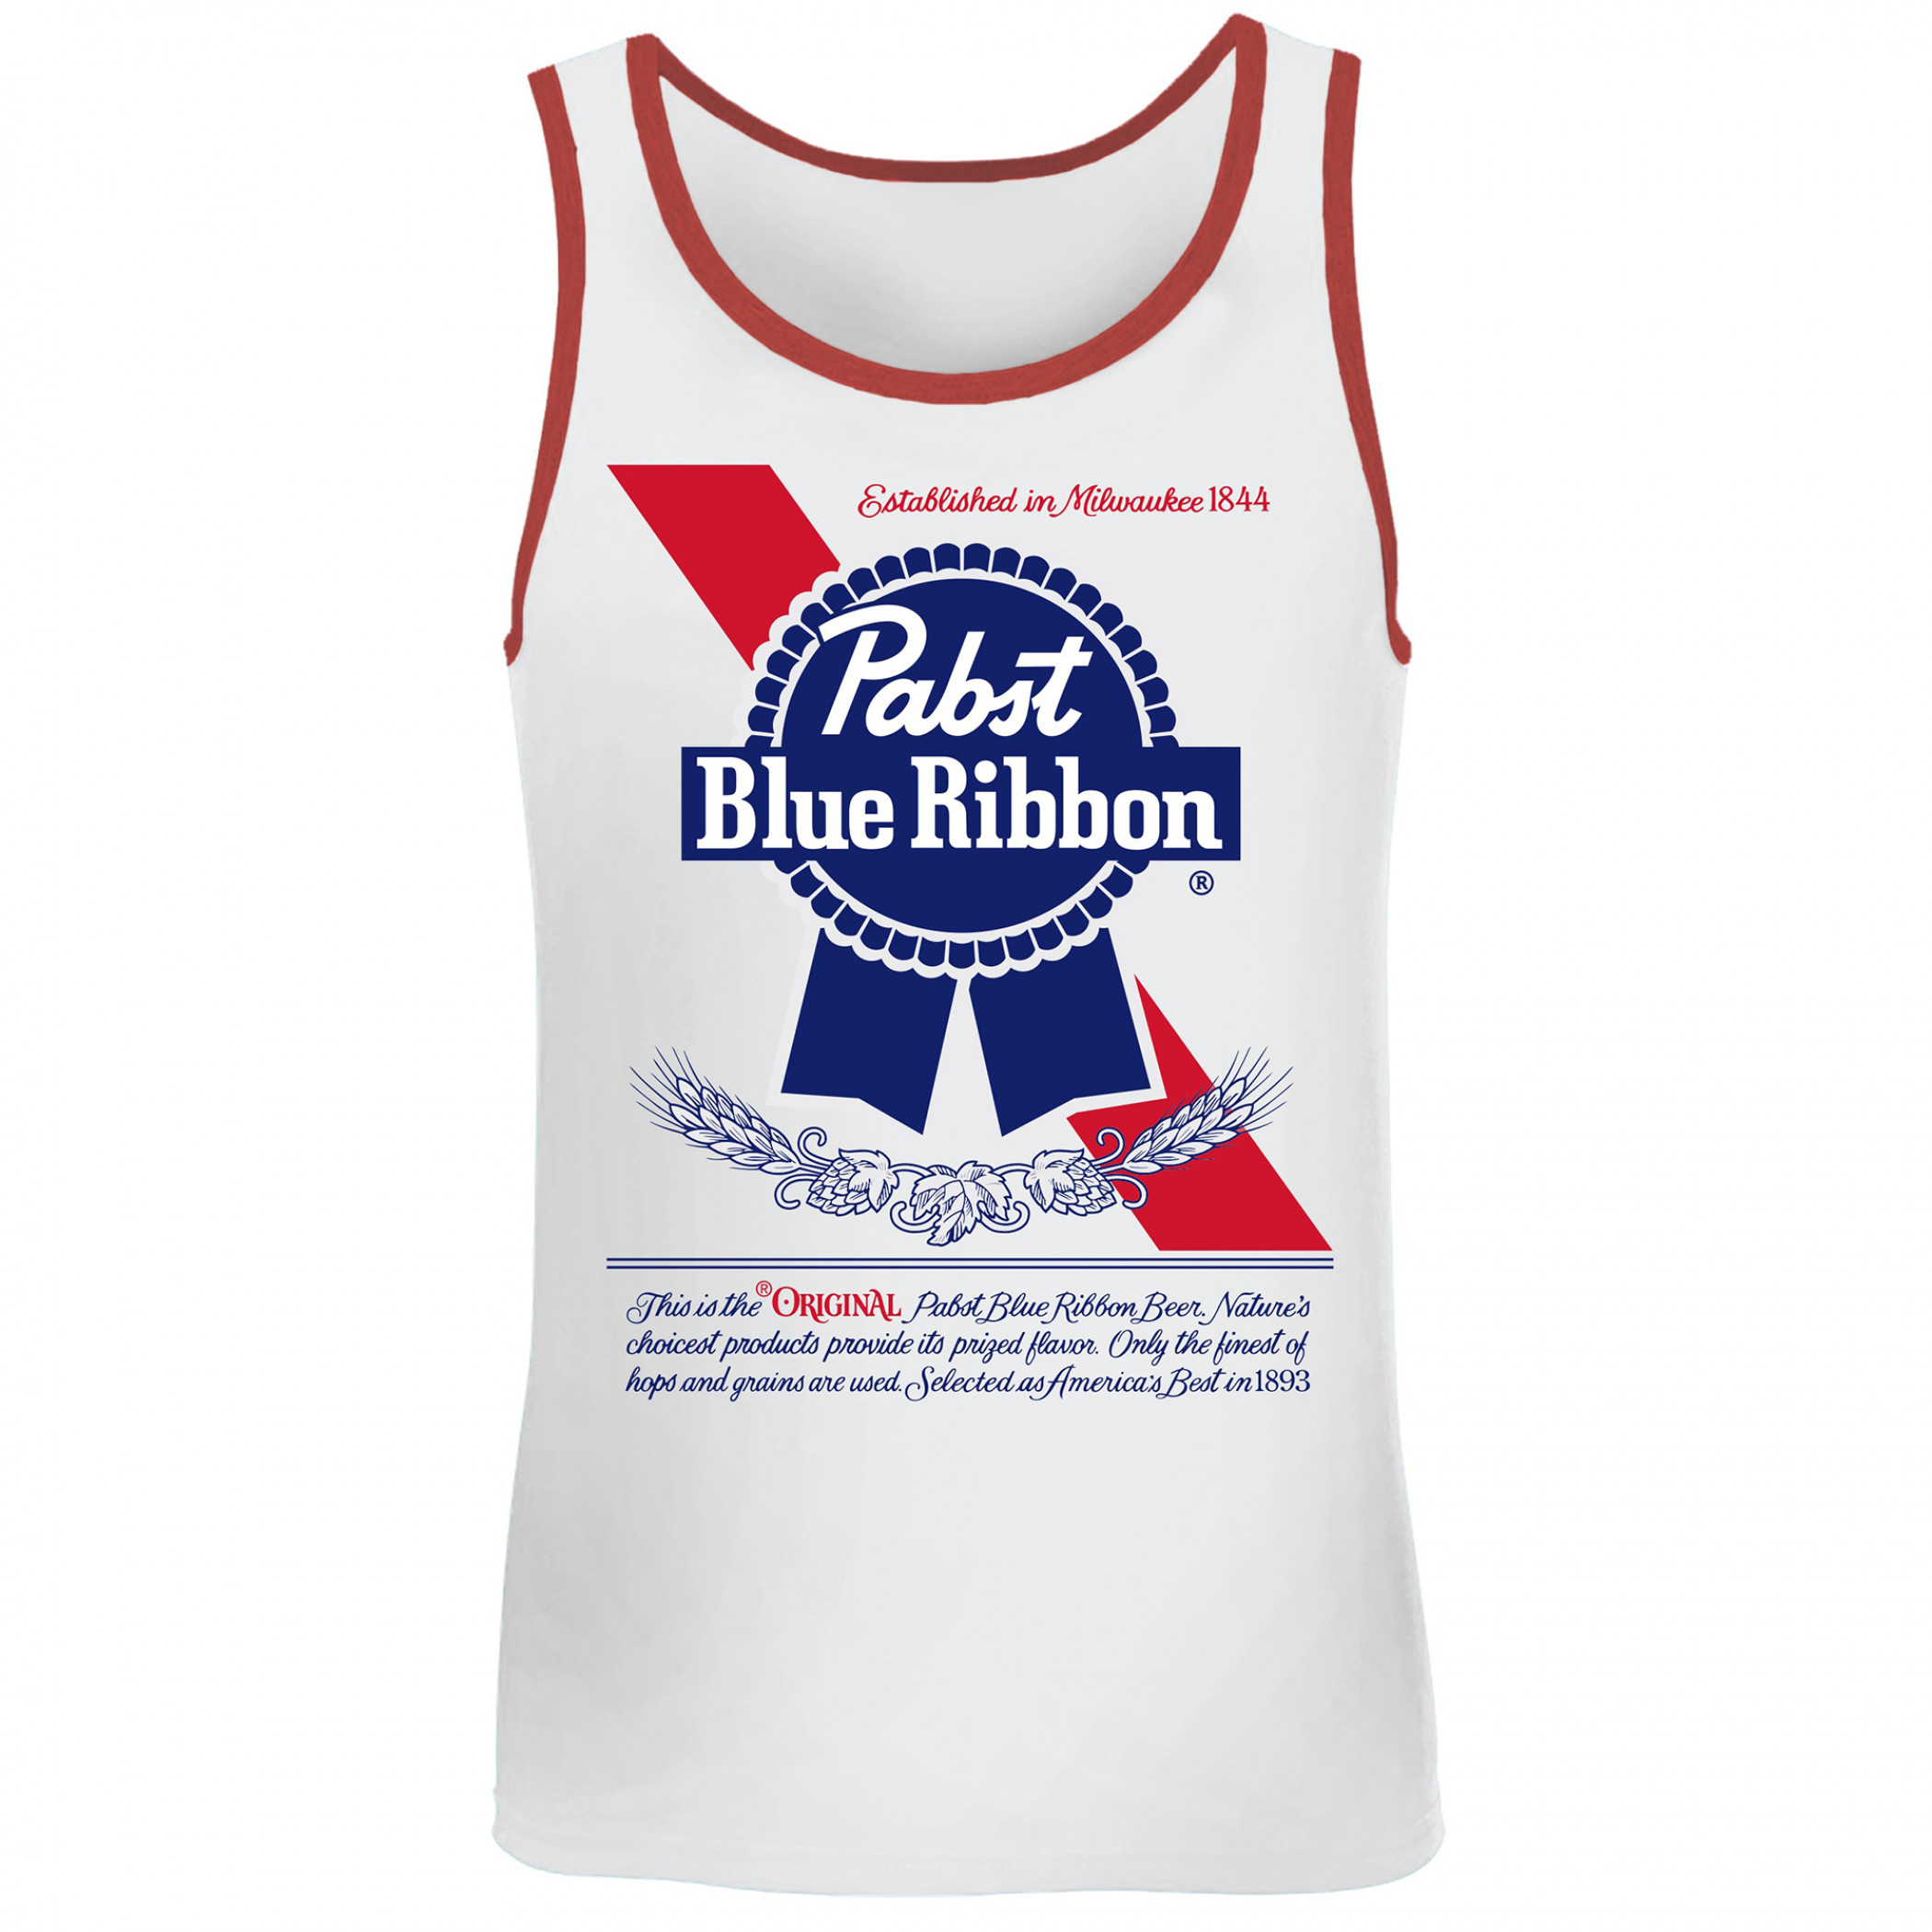 Pabst Blue Ribbon Label & Logo with Red Trim Tank Top